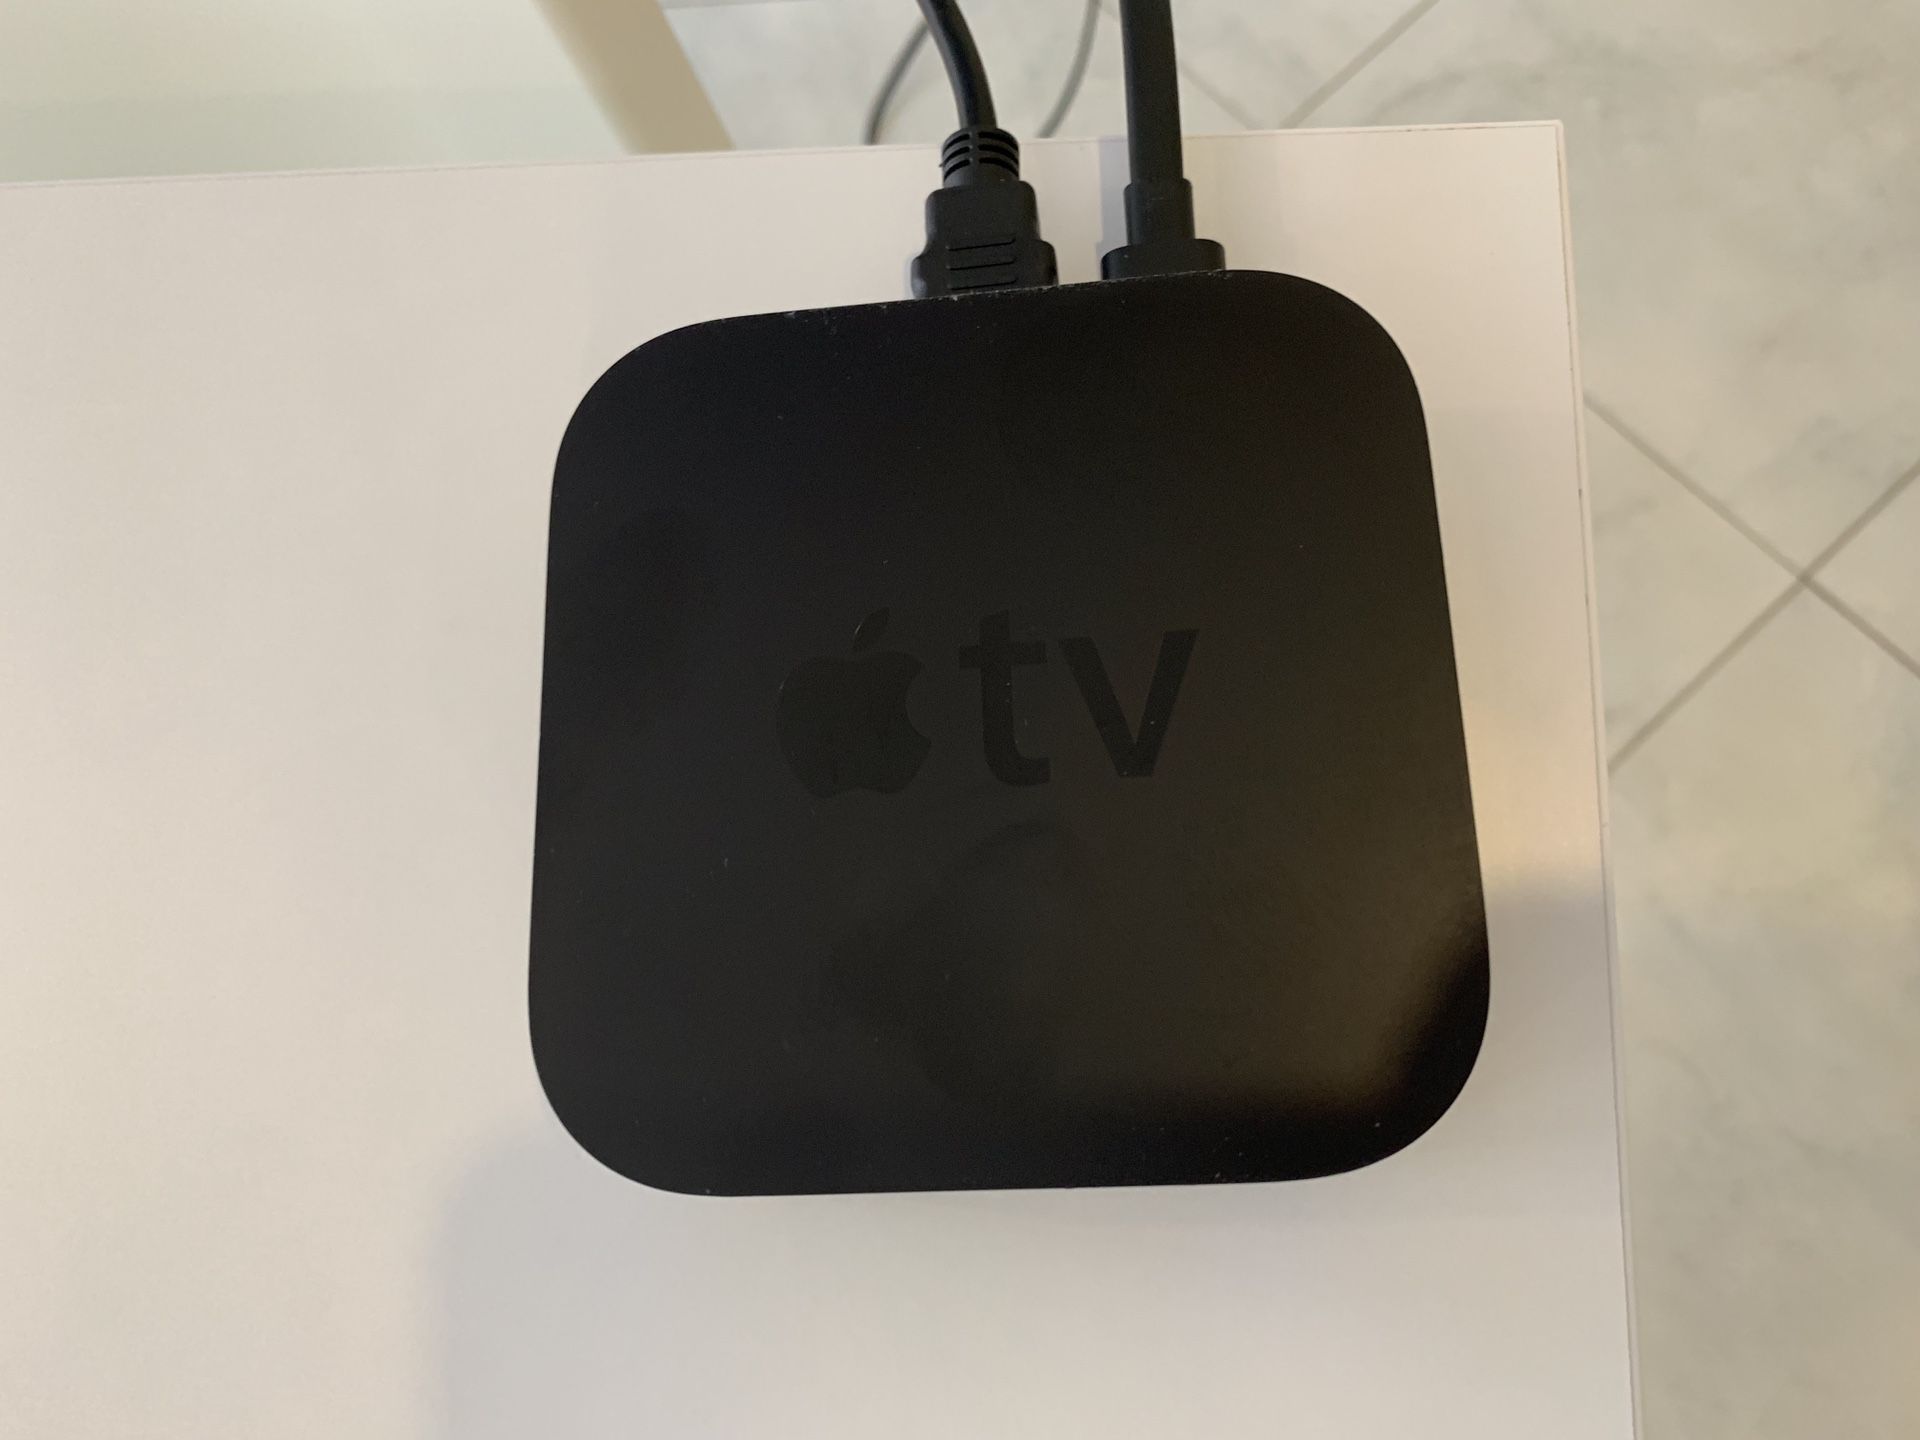 Apple TV 4th Generation 32GB with remote